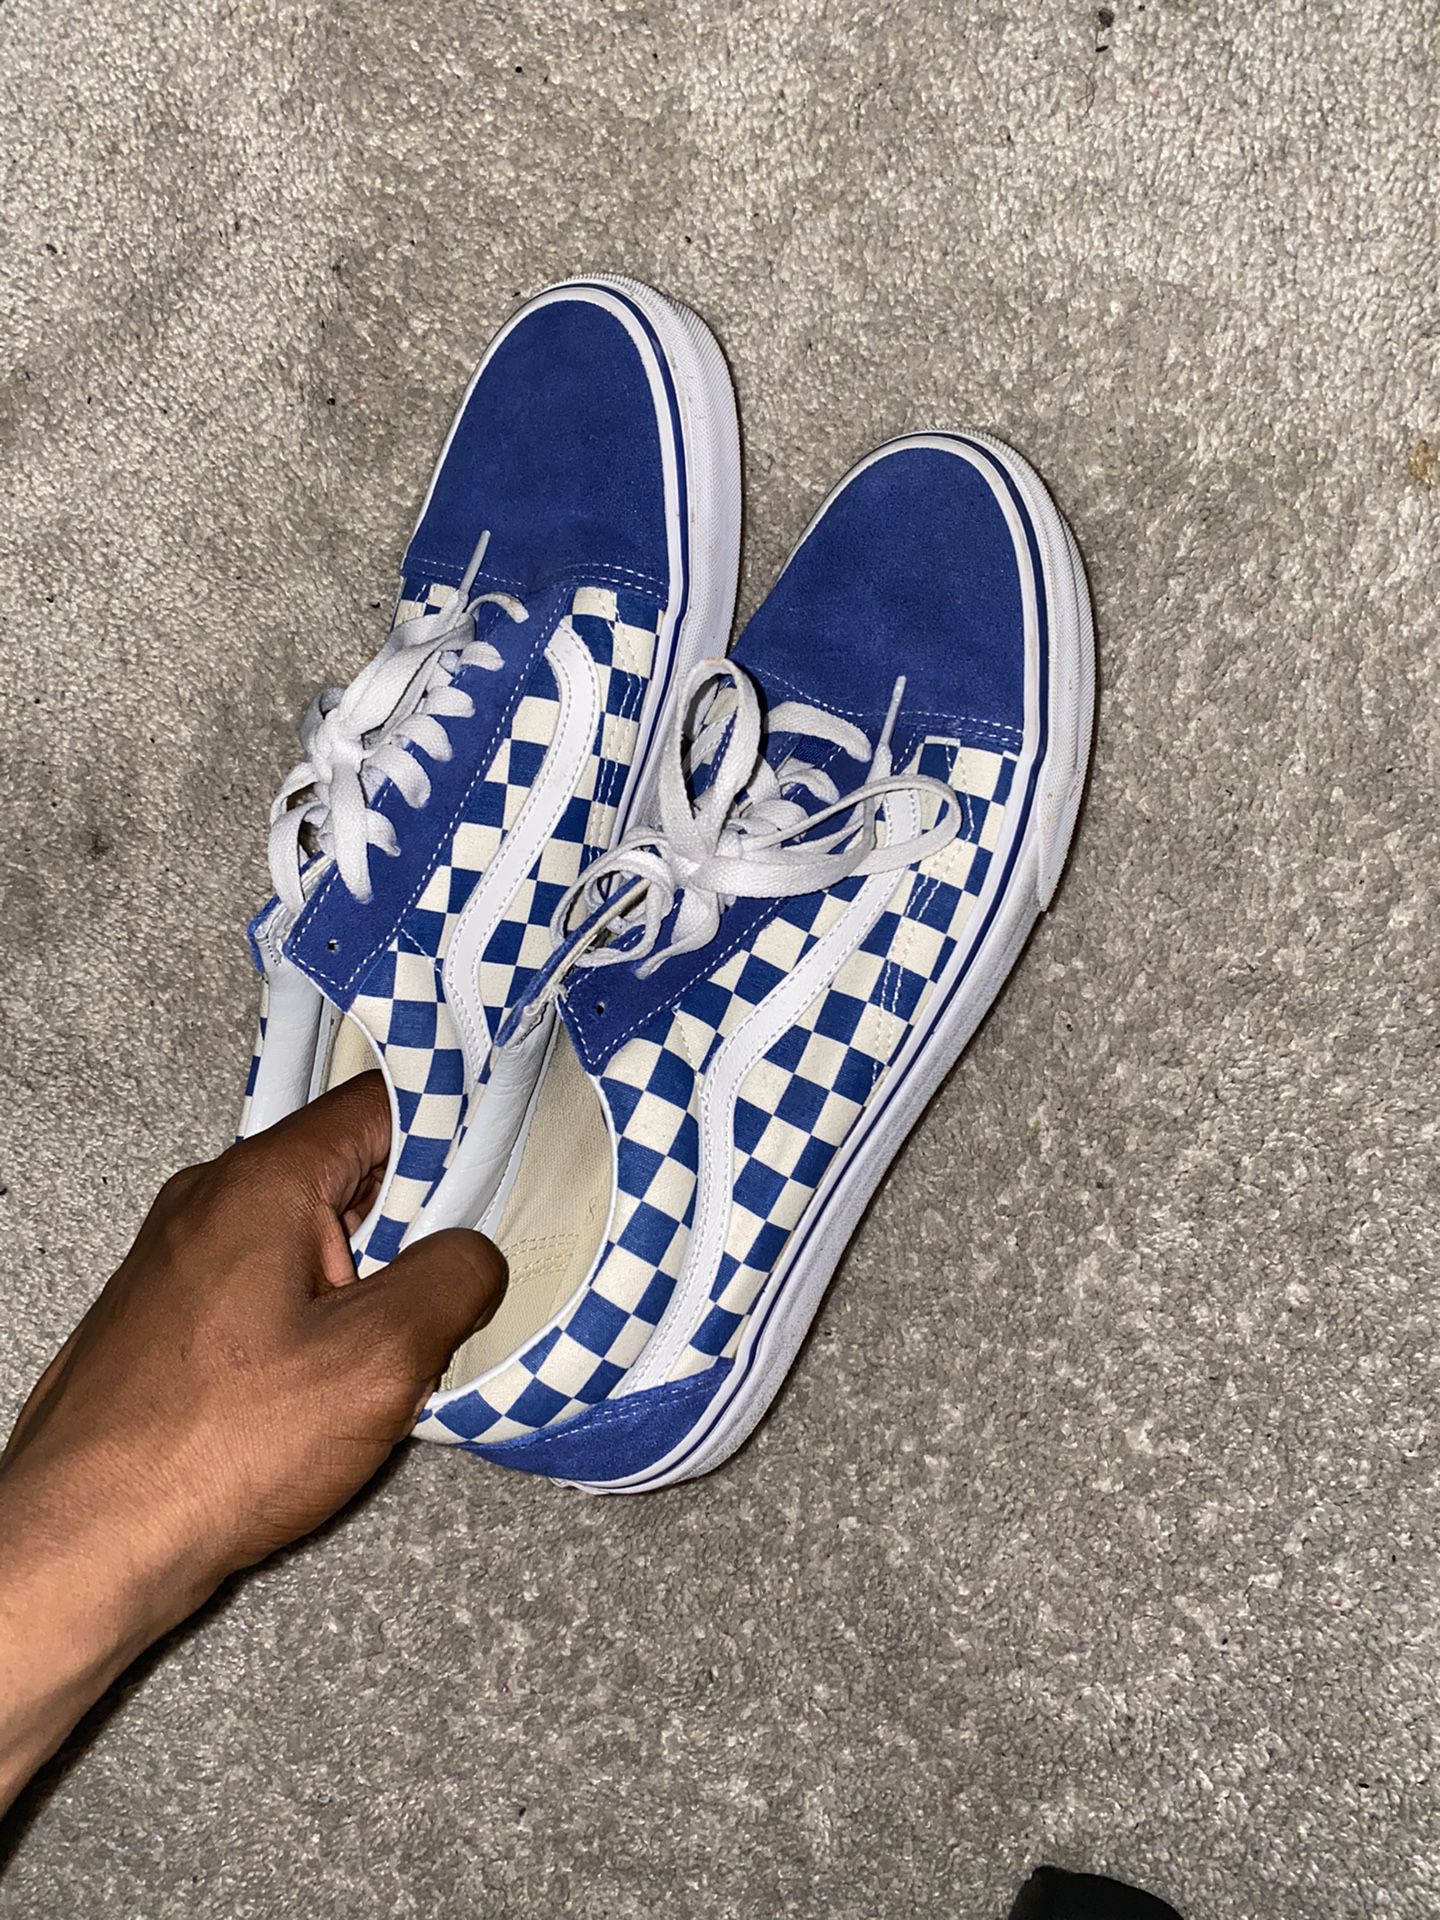 old school blue and white checker board vans (size 11)